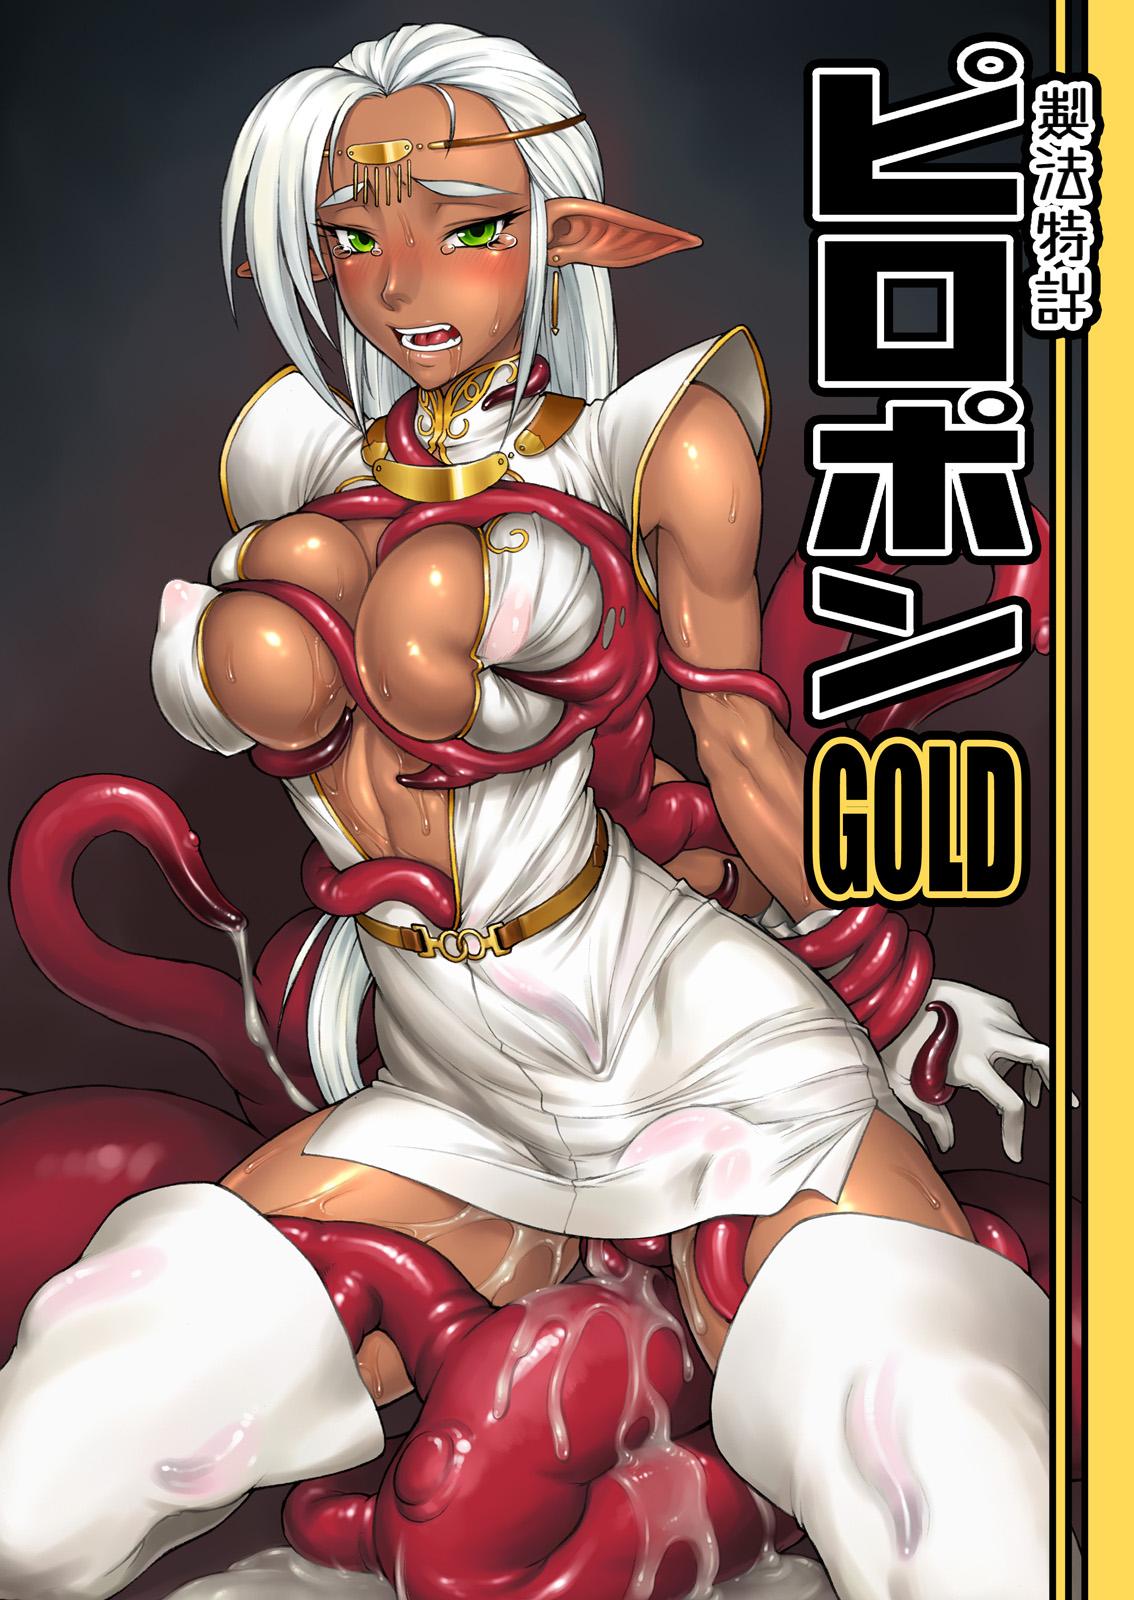 Ladyboy Piropon Gold - Record of lodoss war Cosplay - Page 3